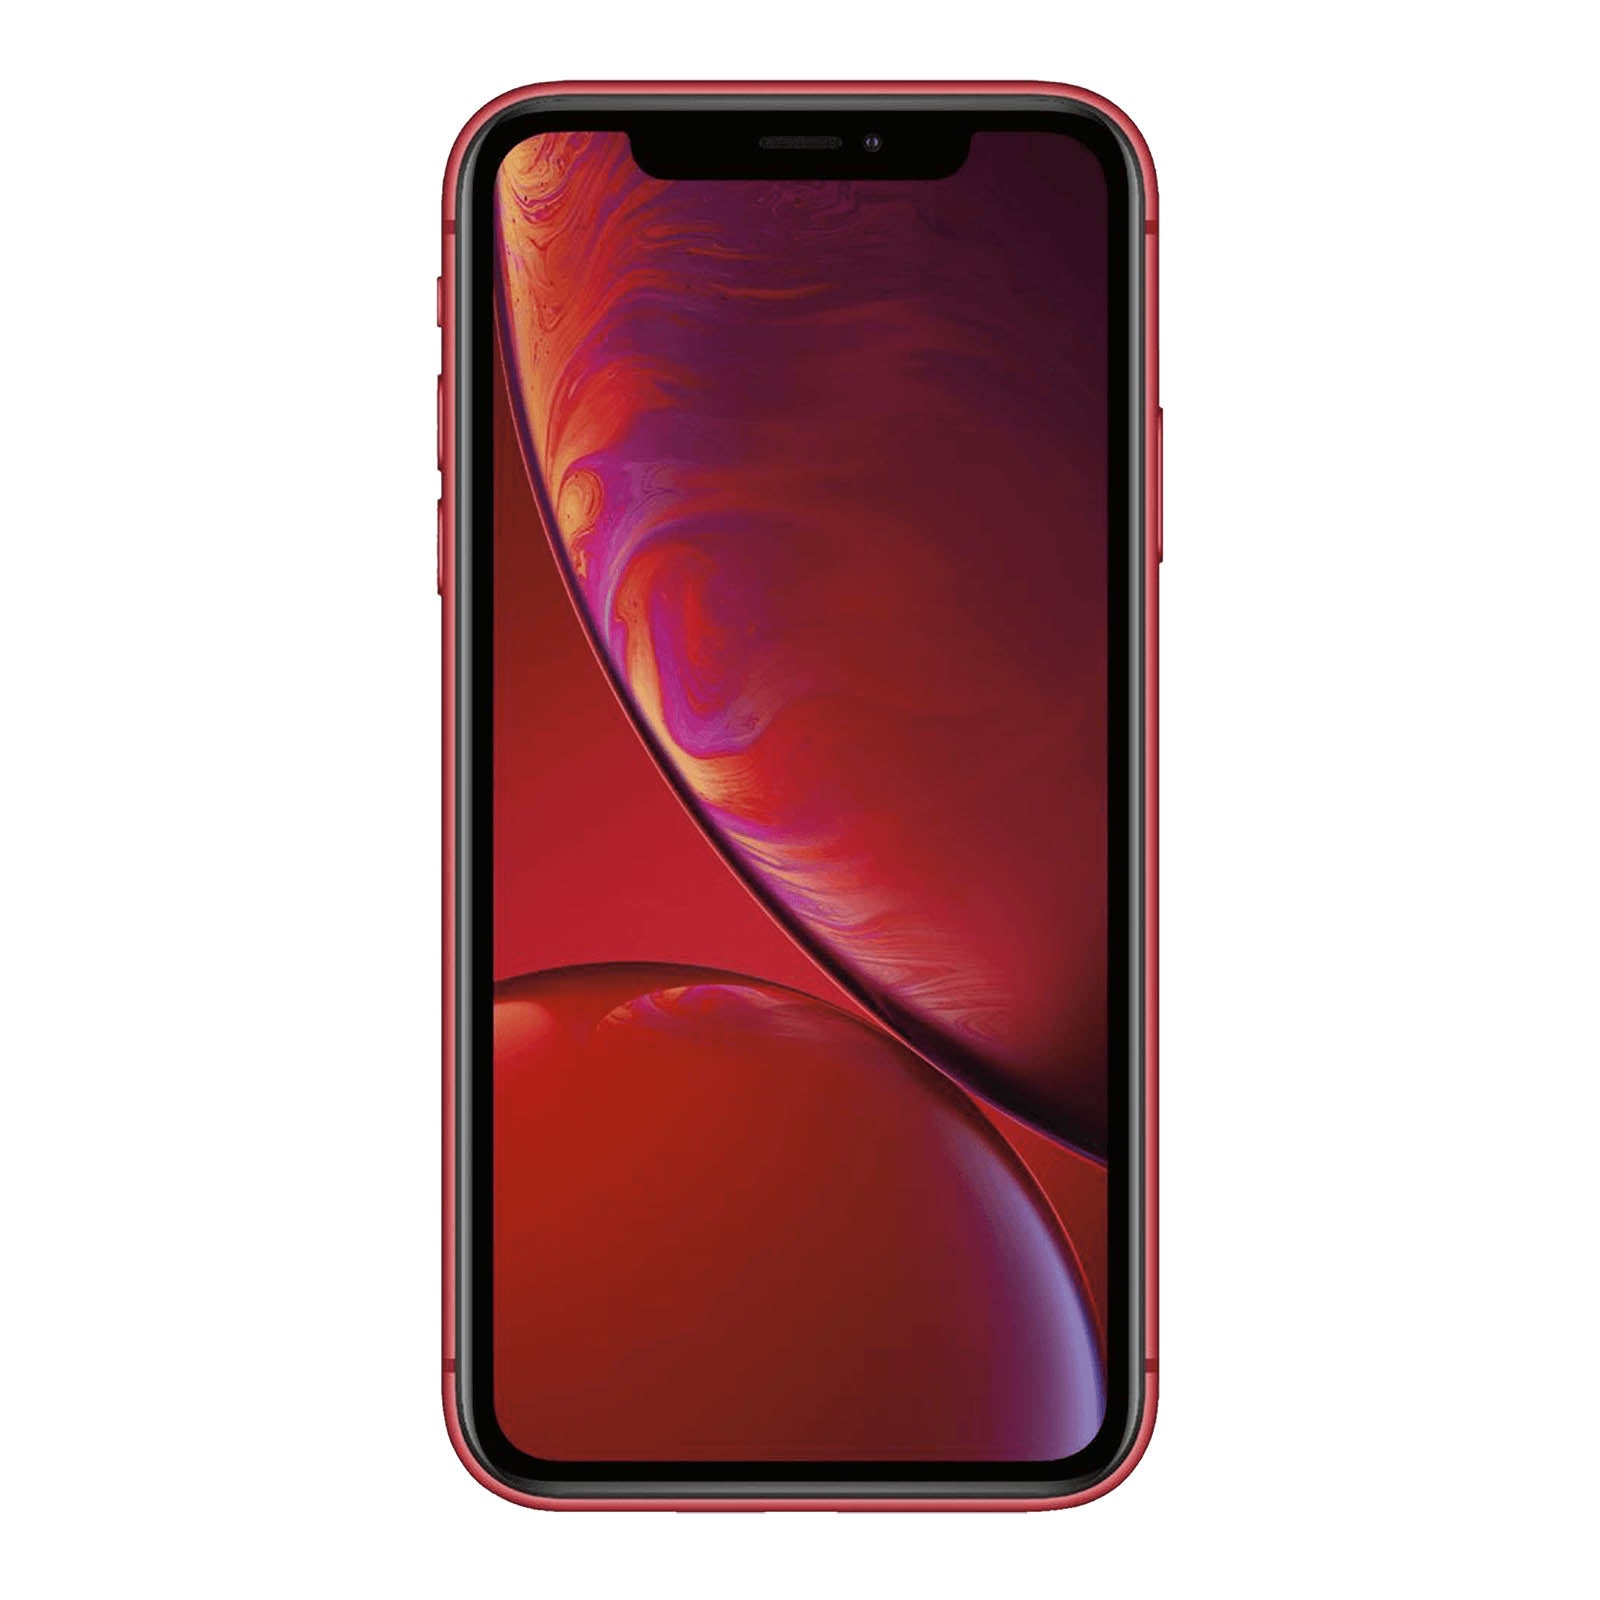 Apple iPhone XR 128GB Product Red Pristine - AT&T